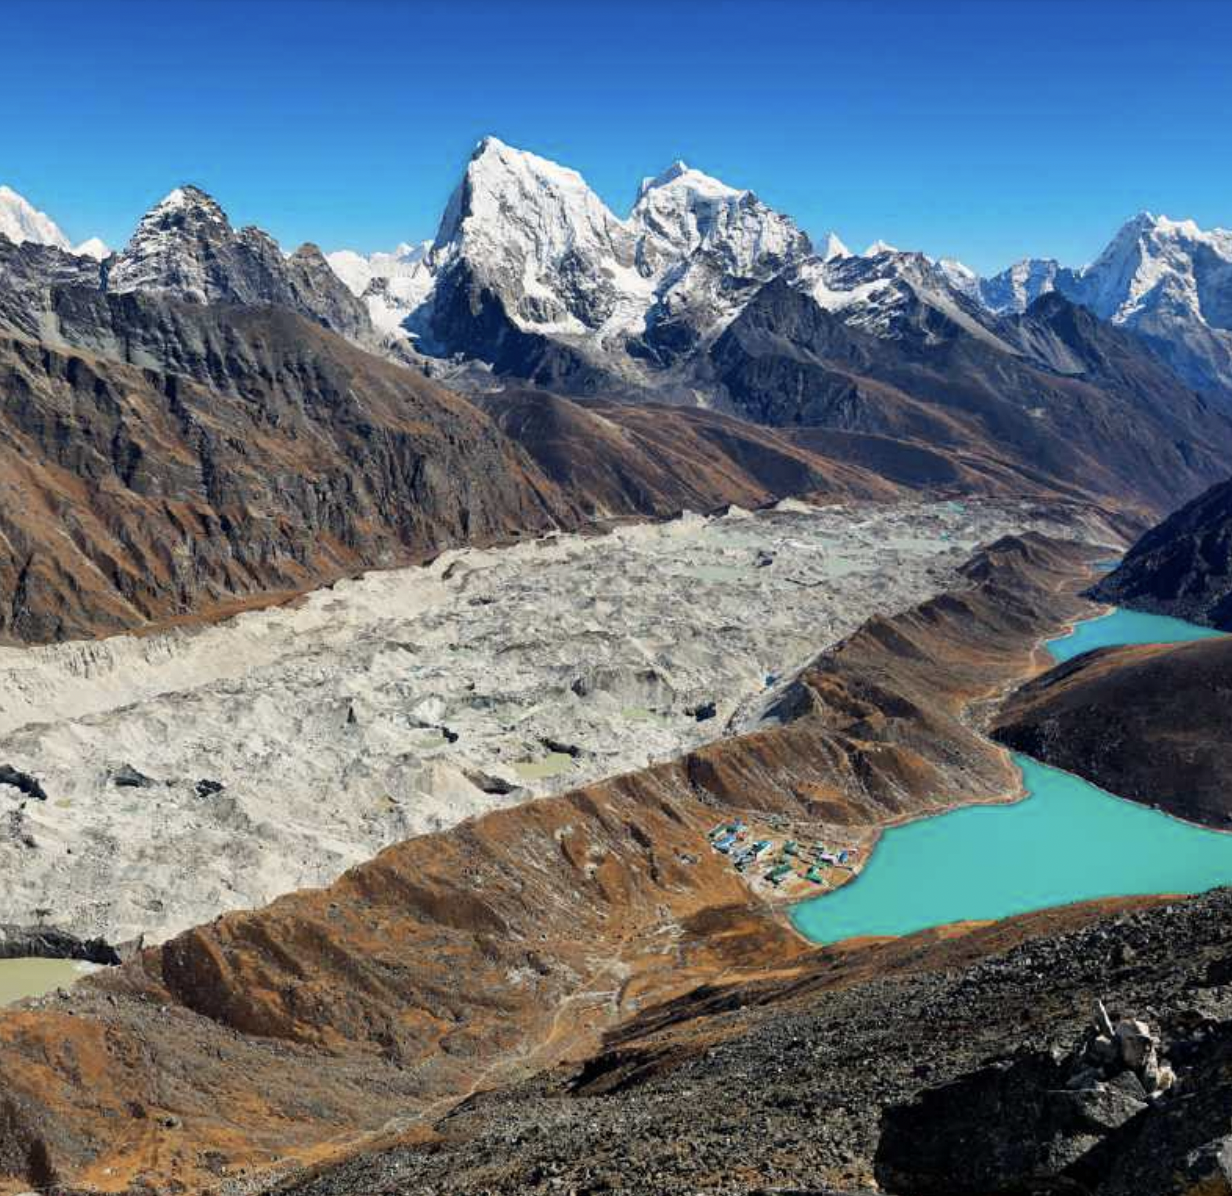 Gokyo Lake, Nepal: a mountain range with a bright turquoise lake in between two peaks